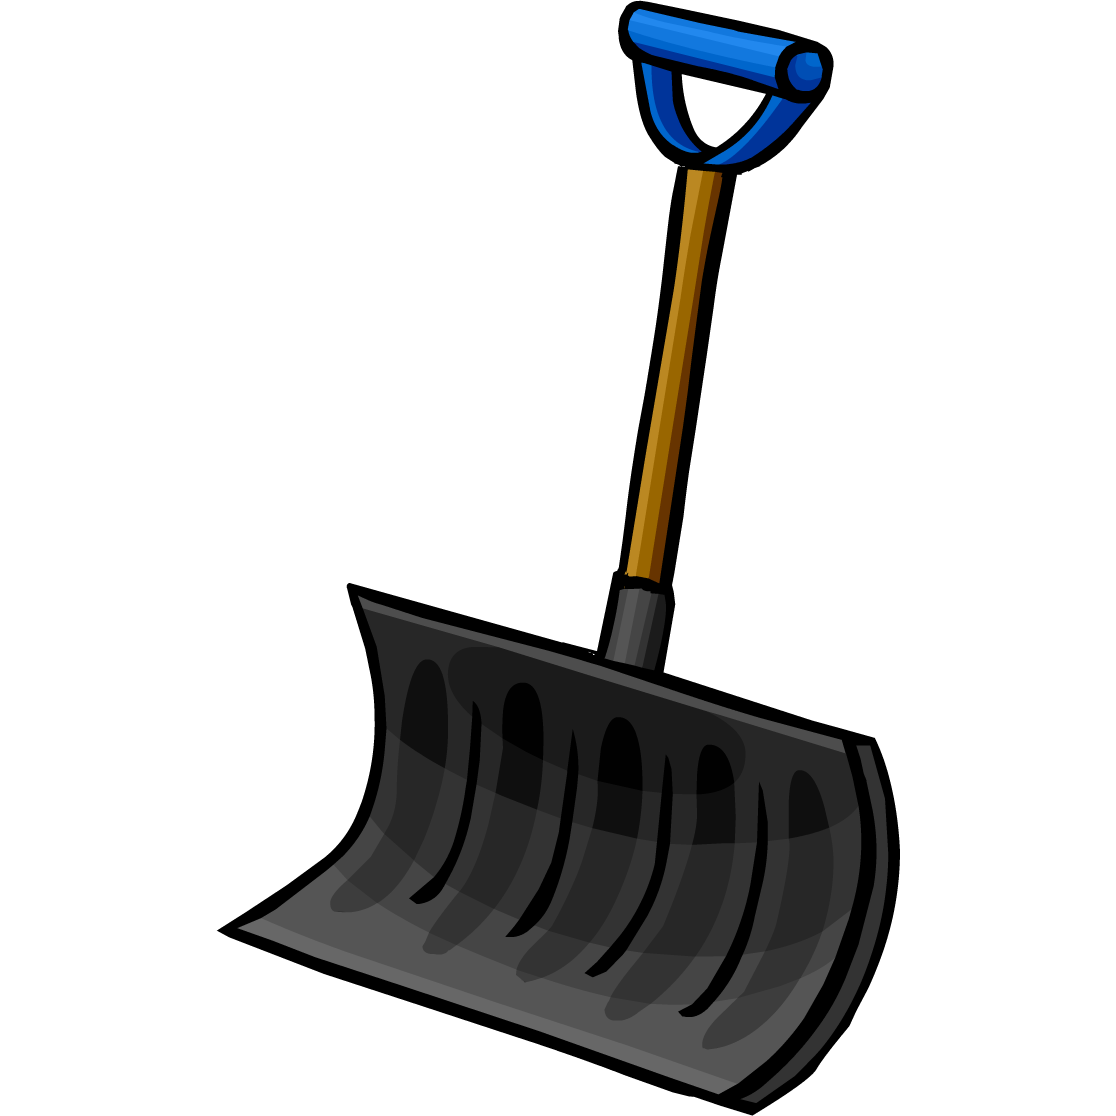 snow shovel: Child with a sno